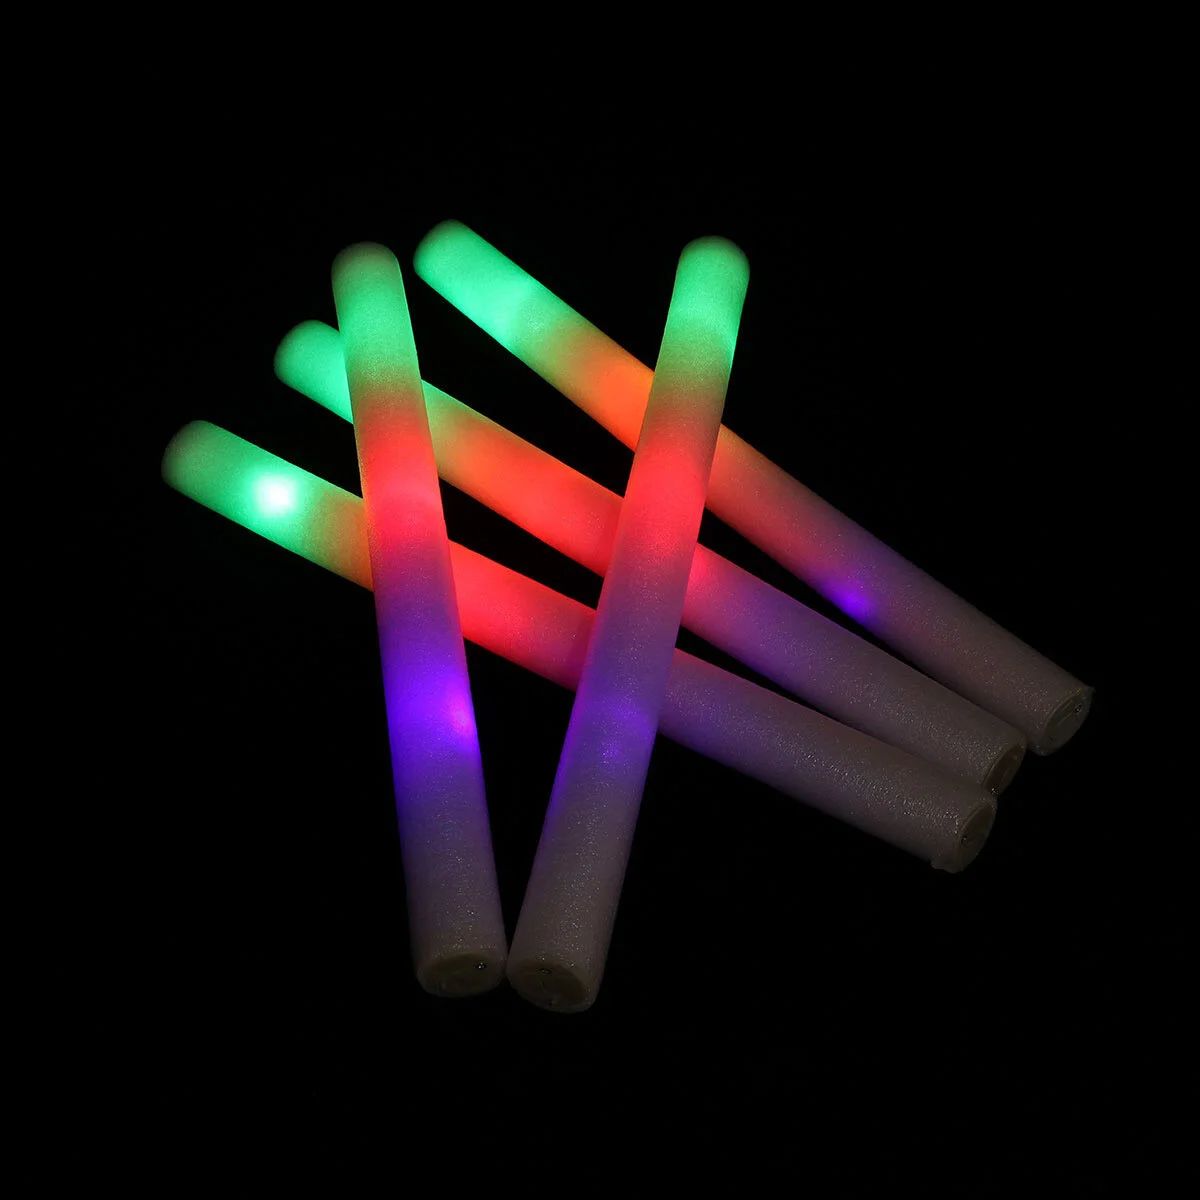 

15pcs LED Glow Stick Fluorescent Light Sticks for Concert Party (White Shell, Colorful)